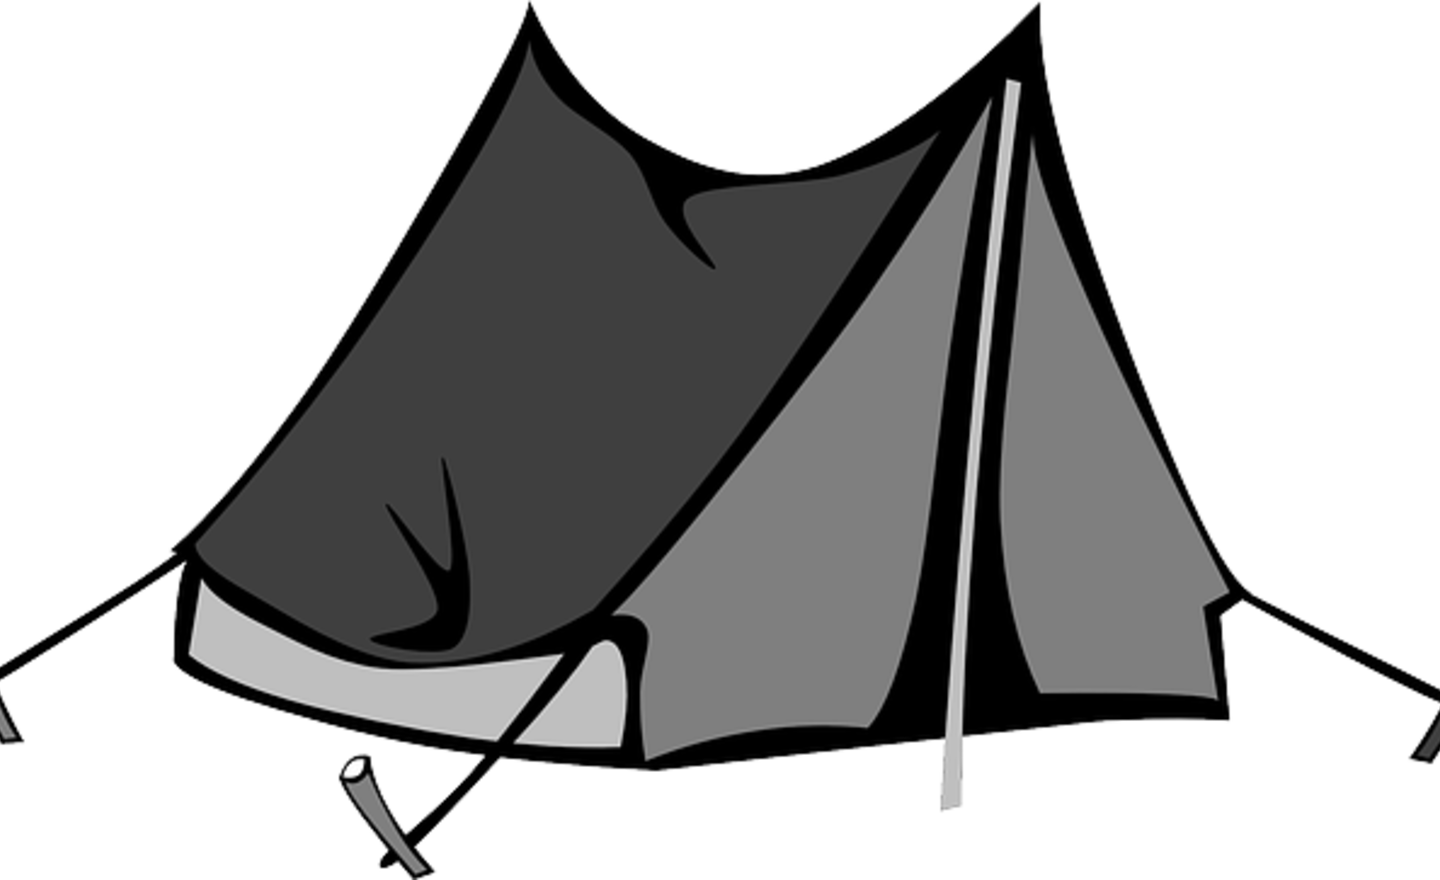 Image of Building Shelters